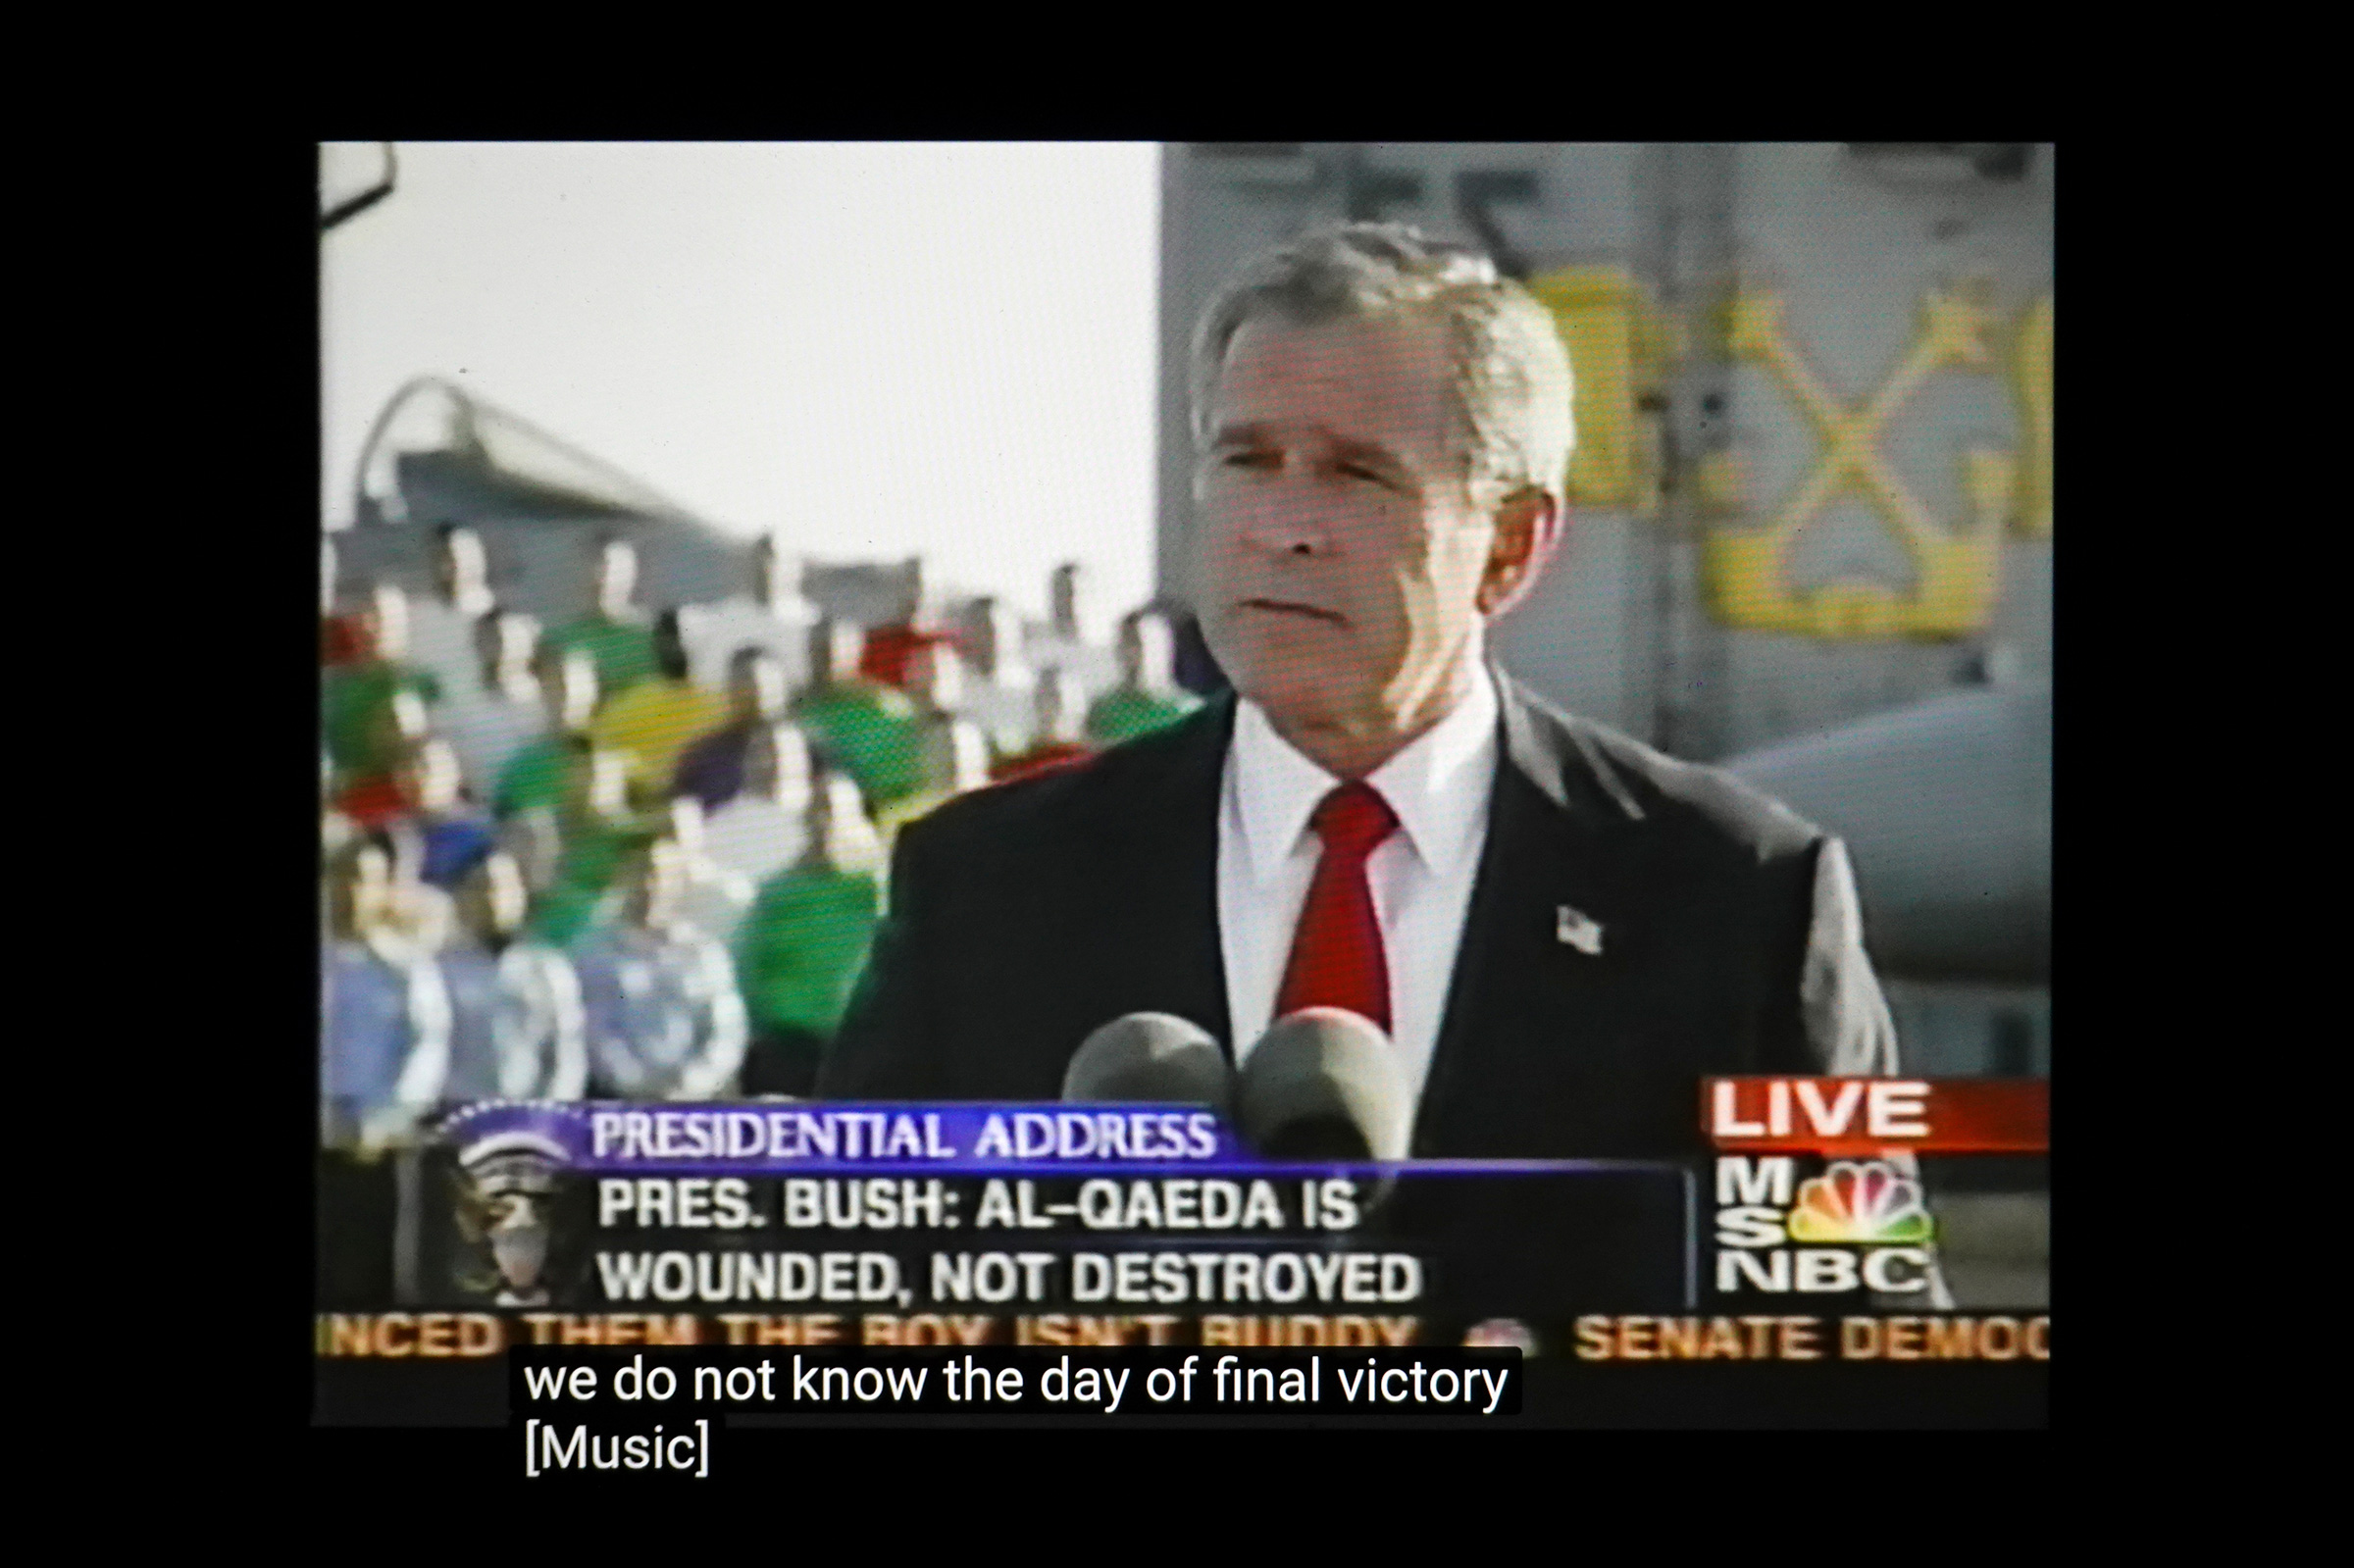 President George W. Bush announces “Mission Accomplished” regarding the war in Iraq on the aircraft carrier U.S.S. Abraham Lincoln on May 1, 2003. The vast majority of casualties and violence occurred after the speech. (Peter van Agtmael—Magnum Photos)